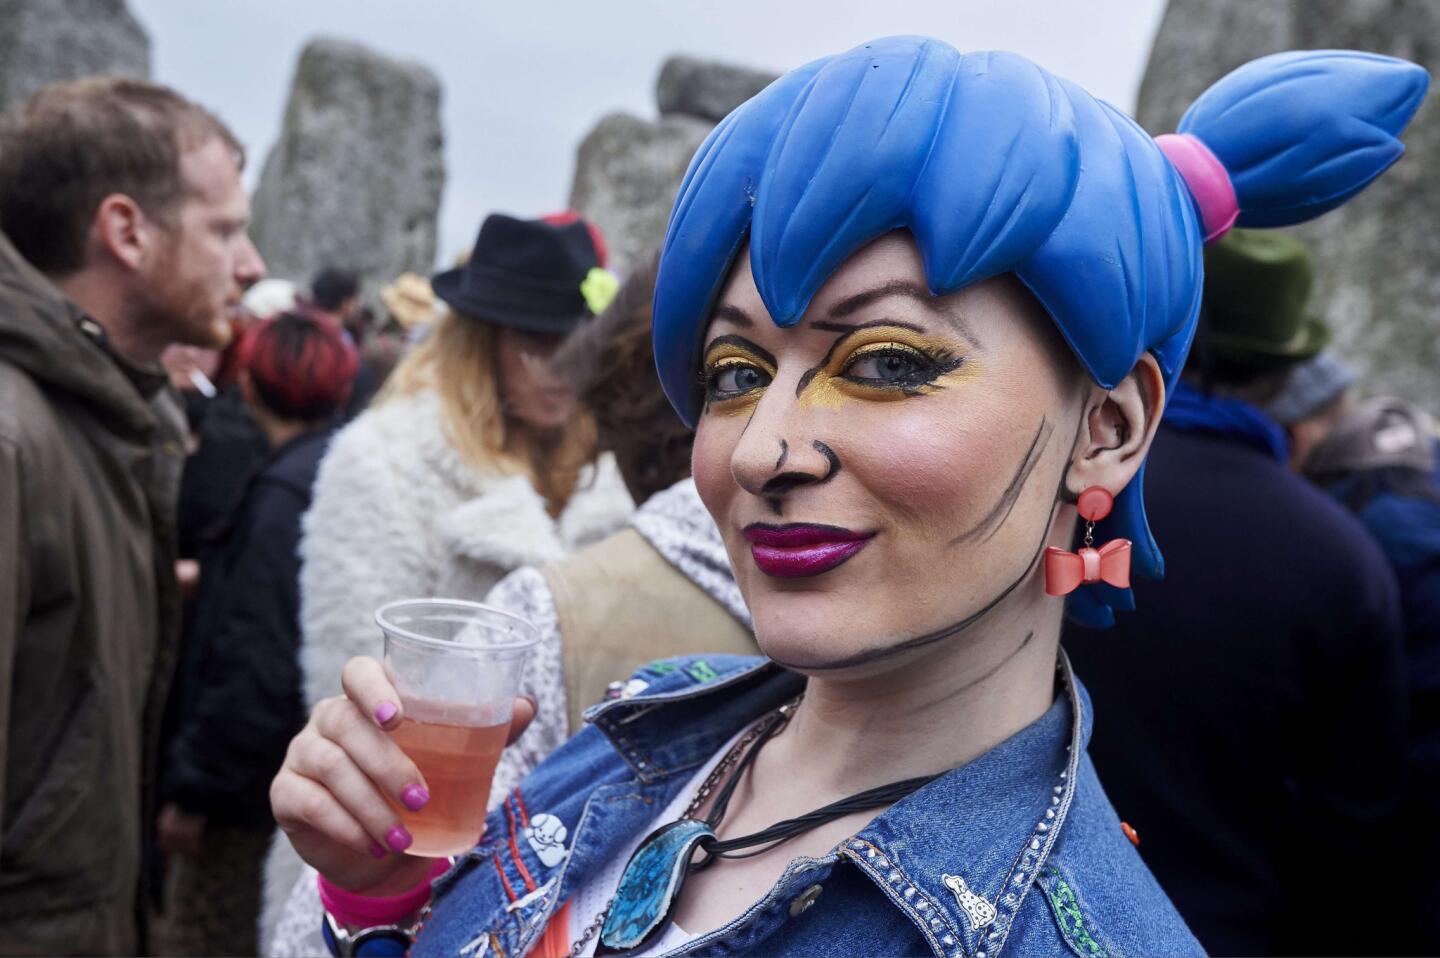 One of the many revelers, new-agers and self-styled Druids who descended on Stonehenge for summer solstice.